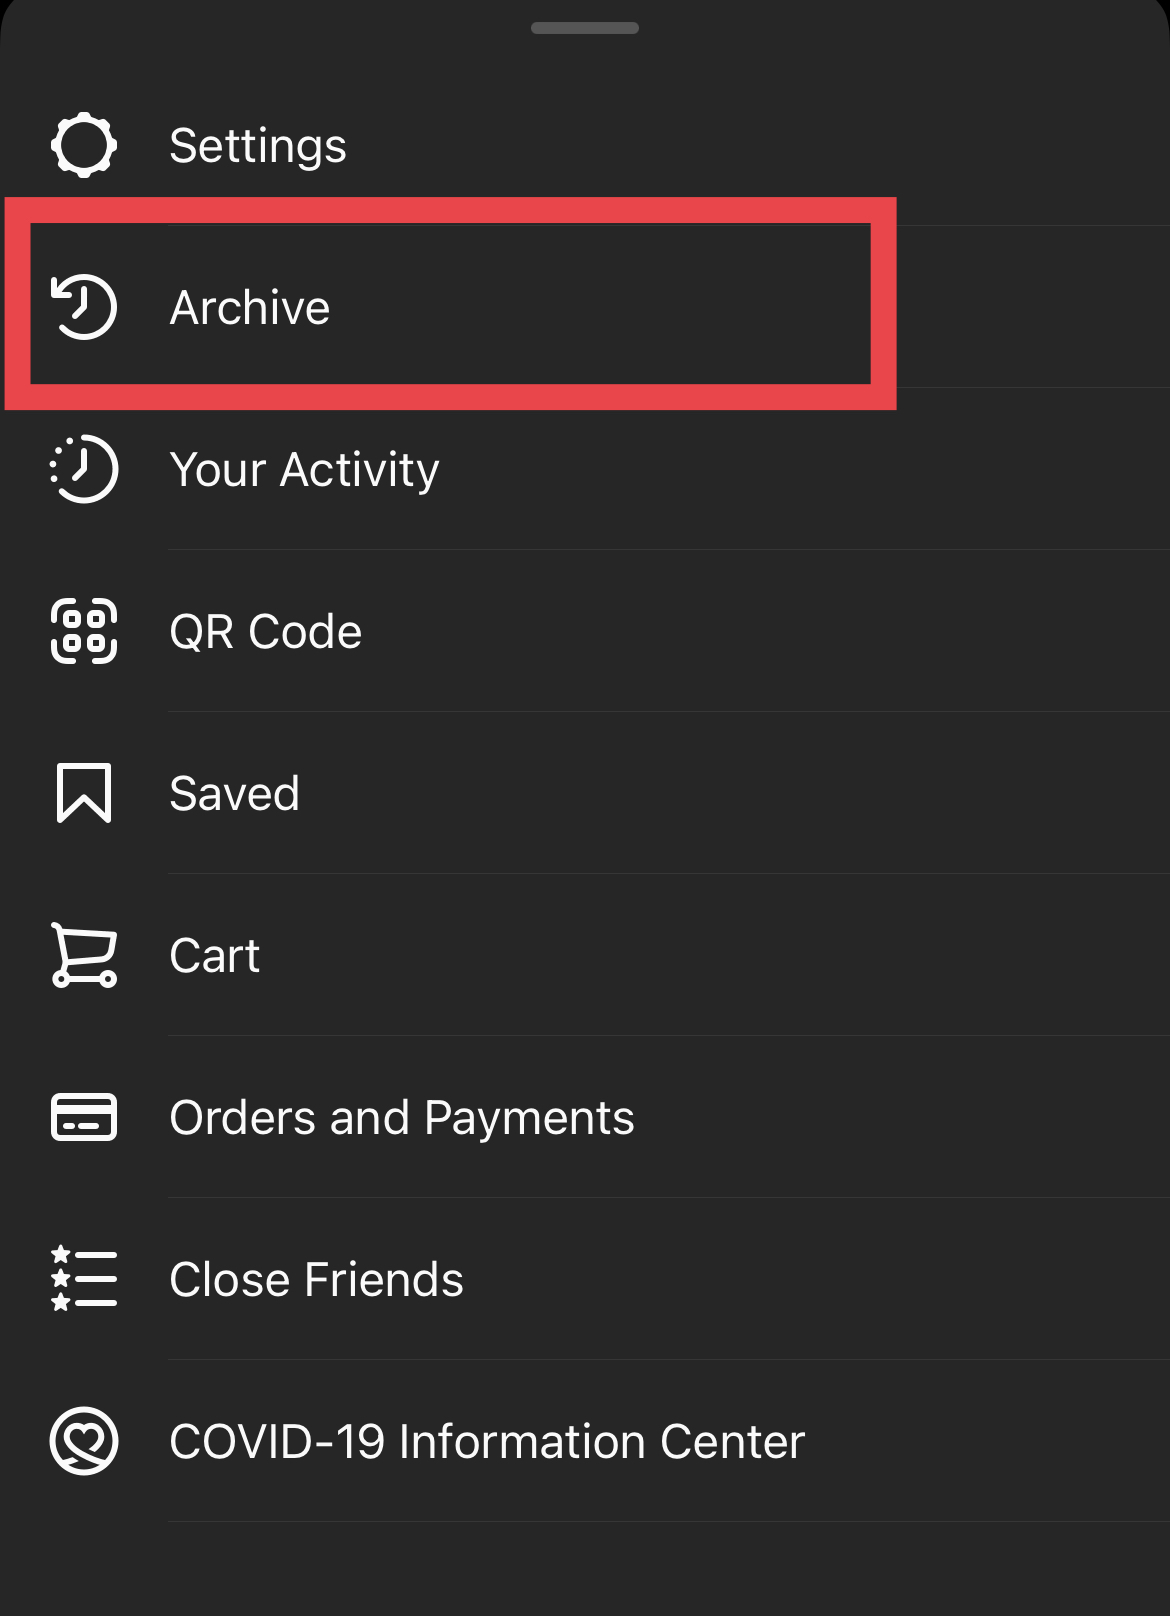 Find your "Archive" in your profile menu